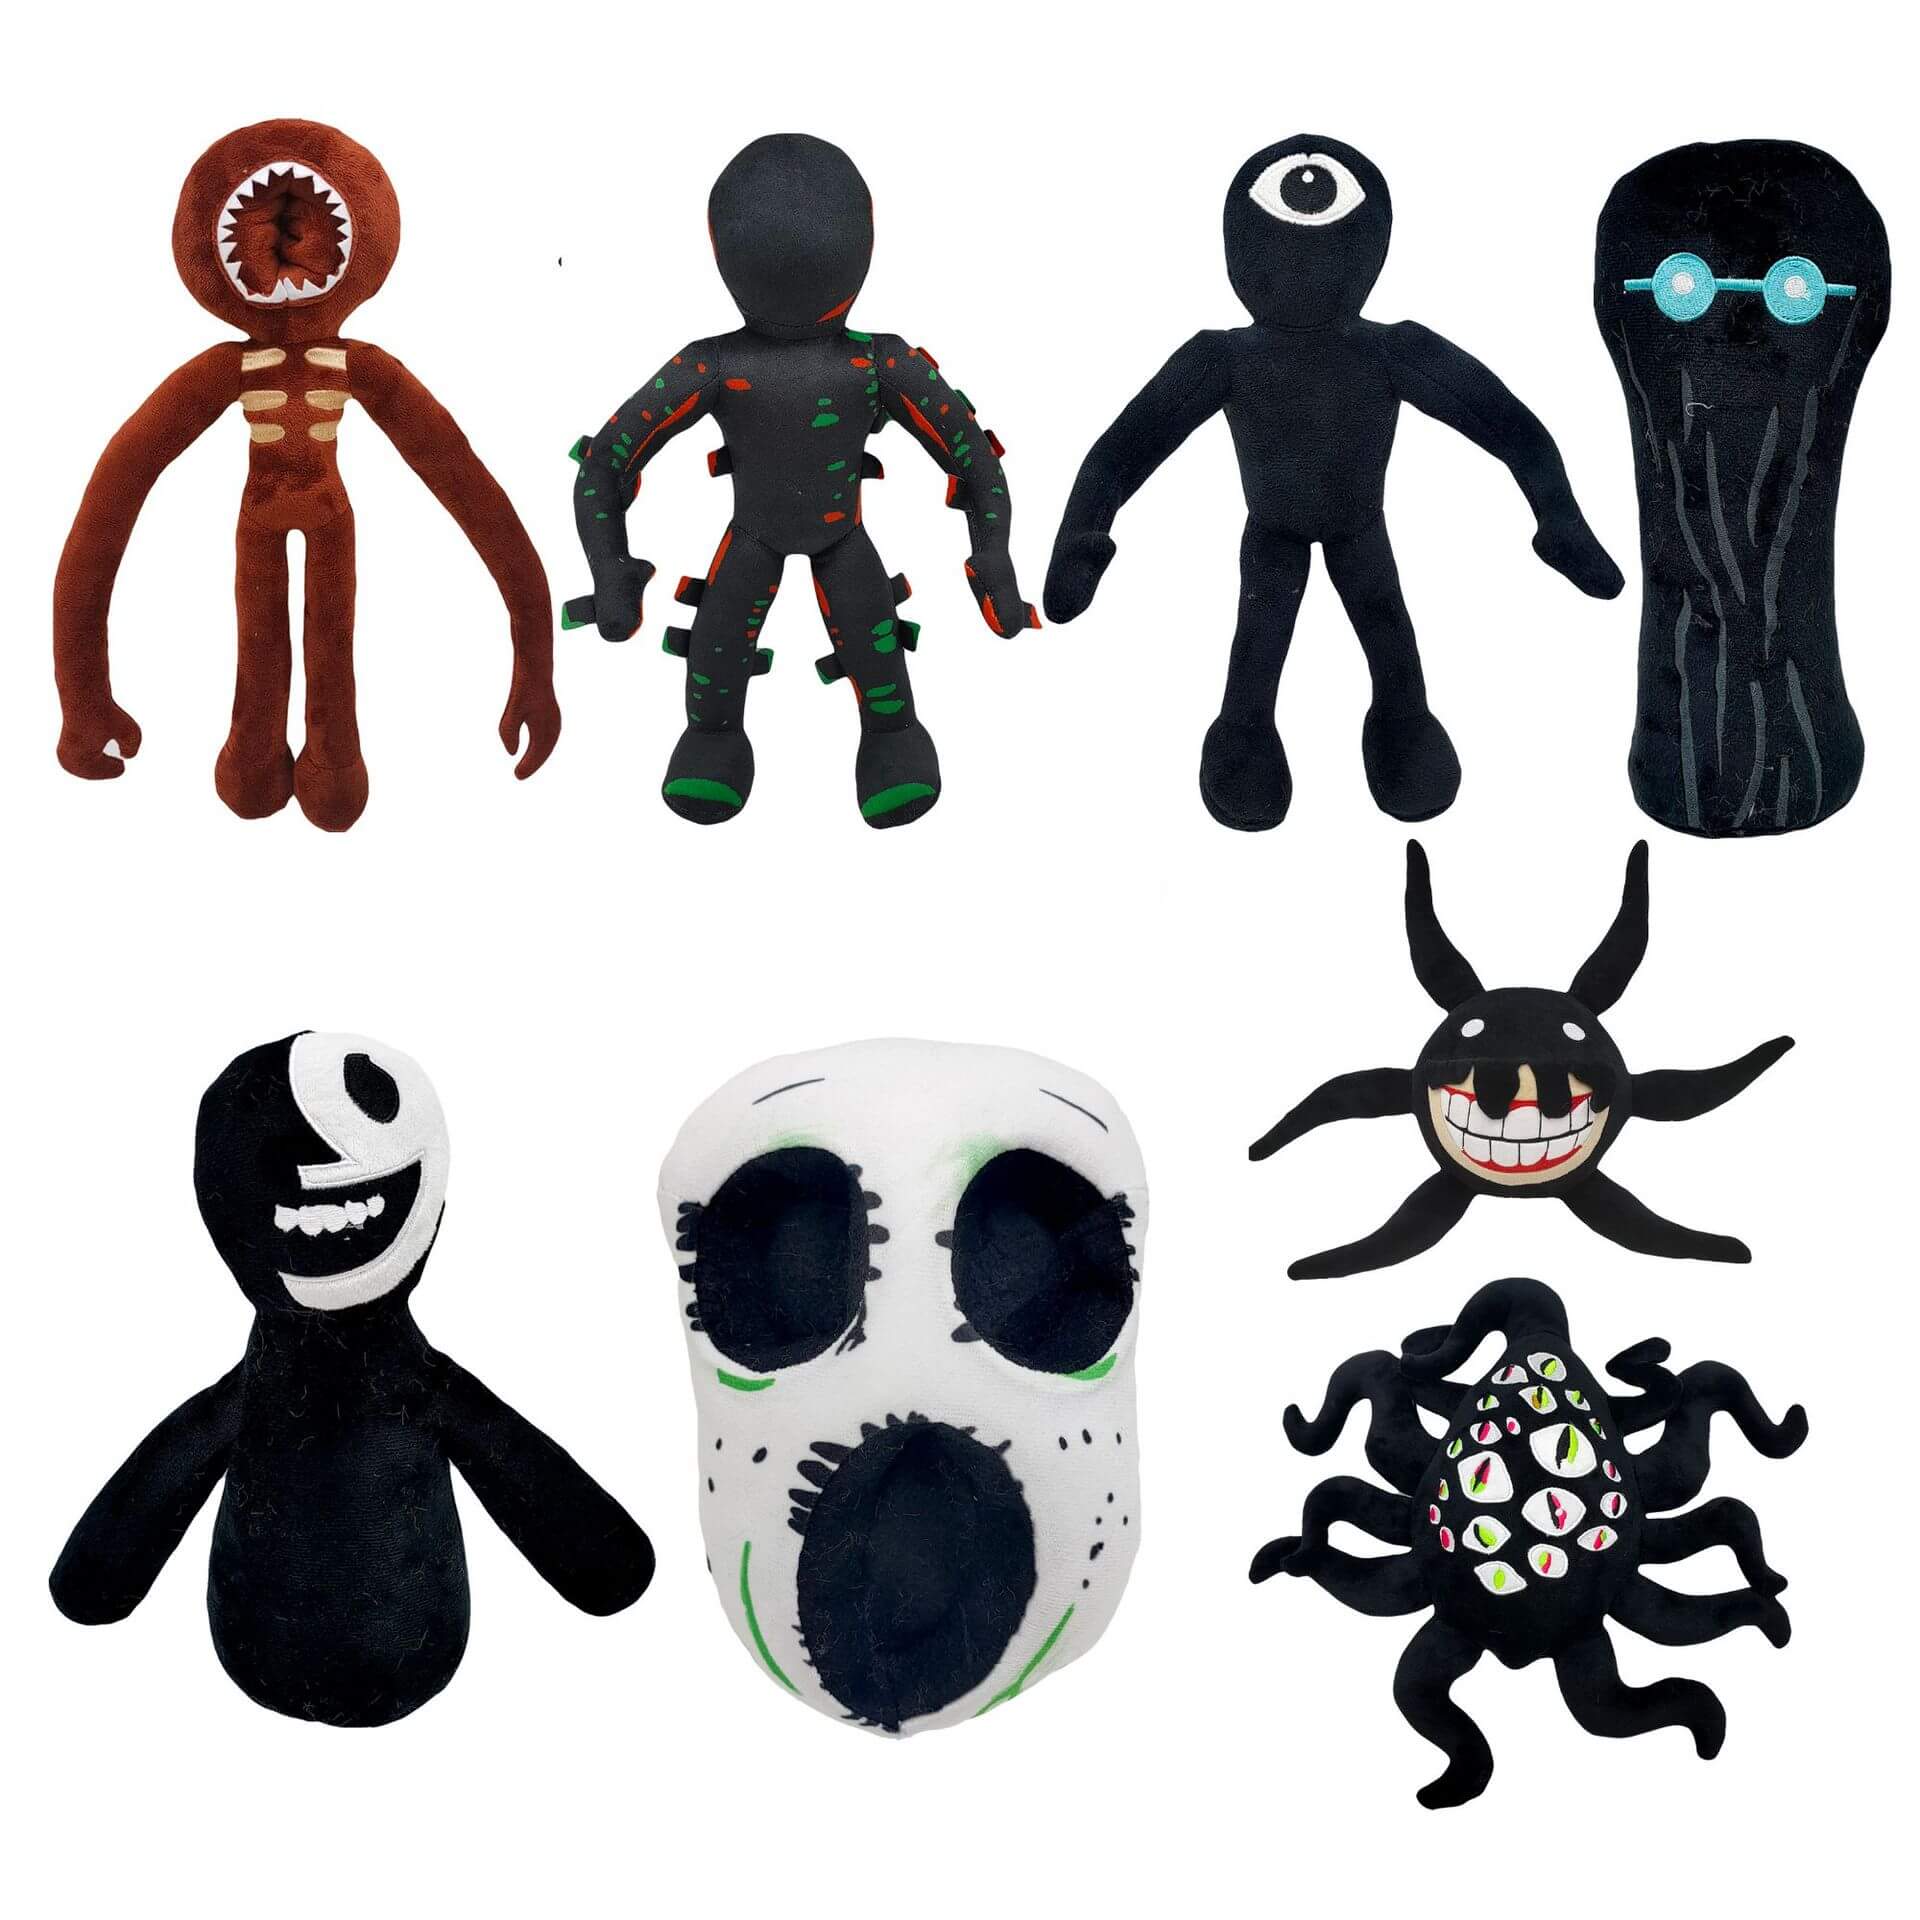 Doors Youtooz Plushies [Non Official] : r/RobloxDoors